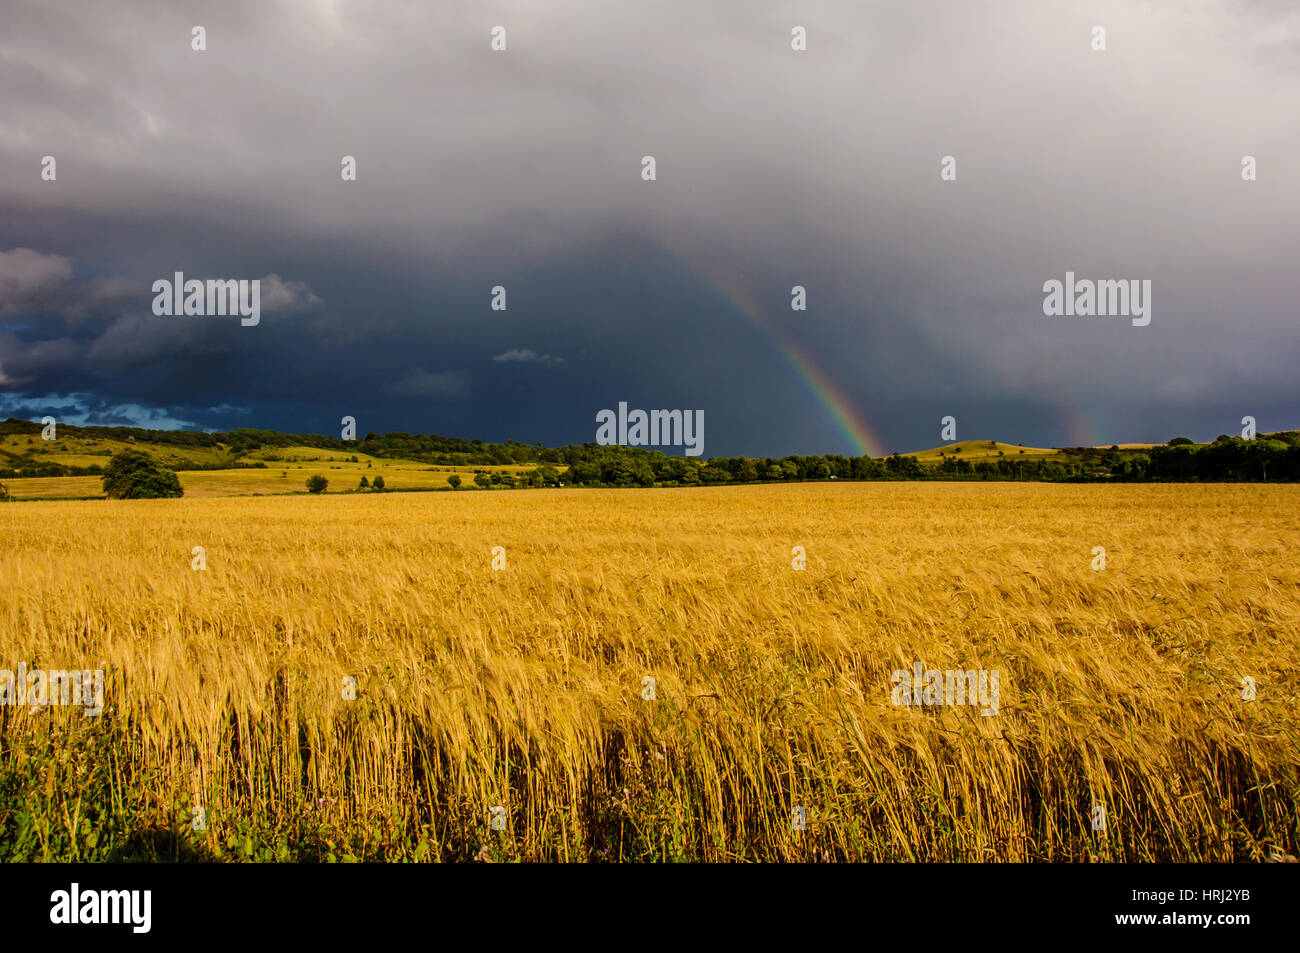 Image of two rainbows after heavy rain above corn field at Bedfordshire next to Ivinghoe village. Stock Photo